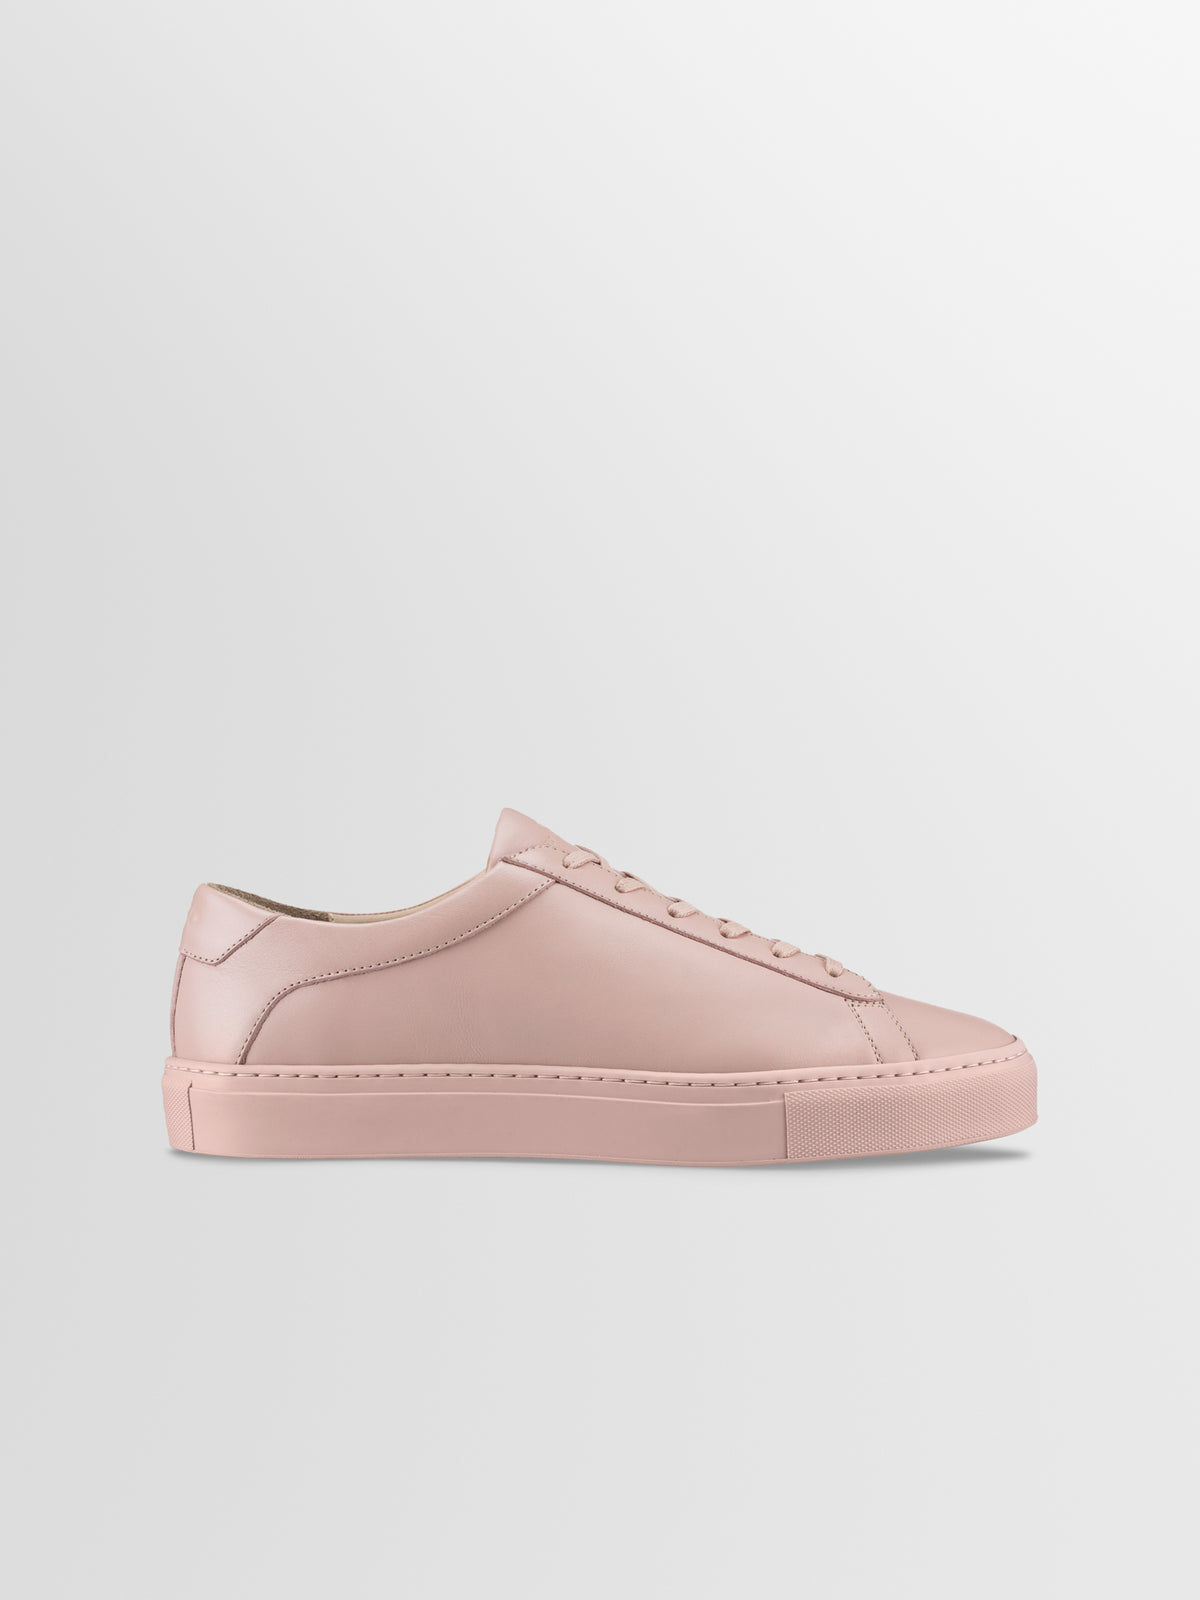 at ringe talent couscous Men's Pink Low-top Leather Sneakers | Capri in Pink Quartz | Koio – KOIO